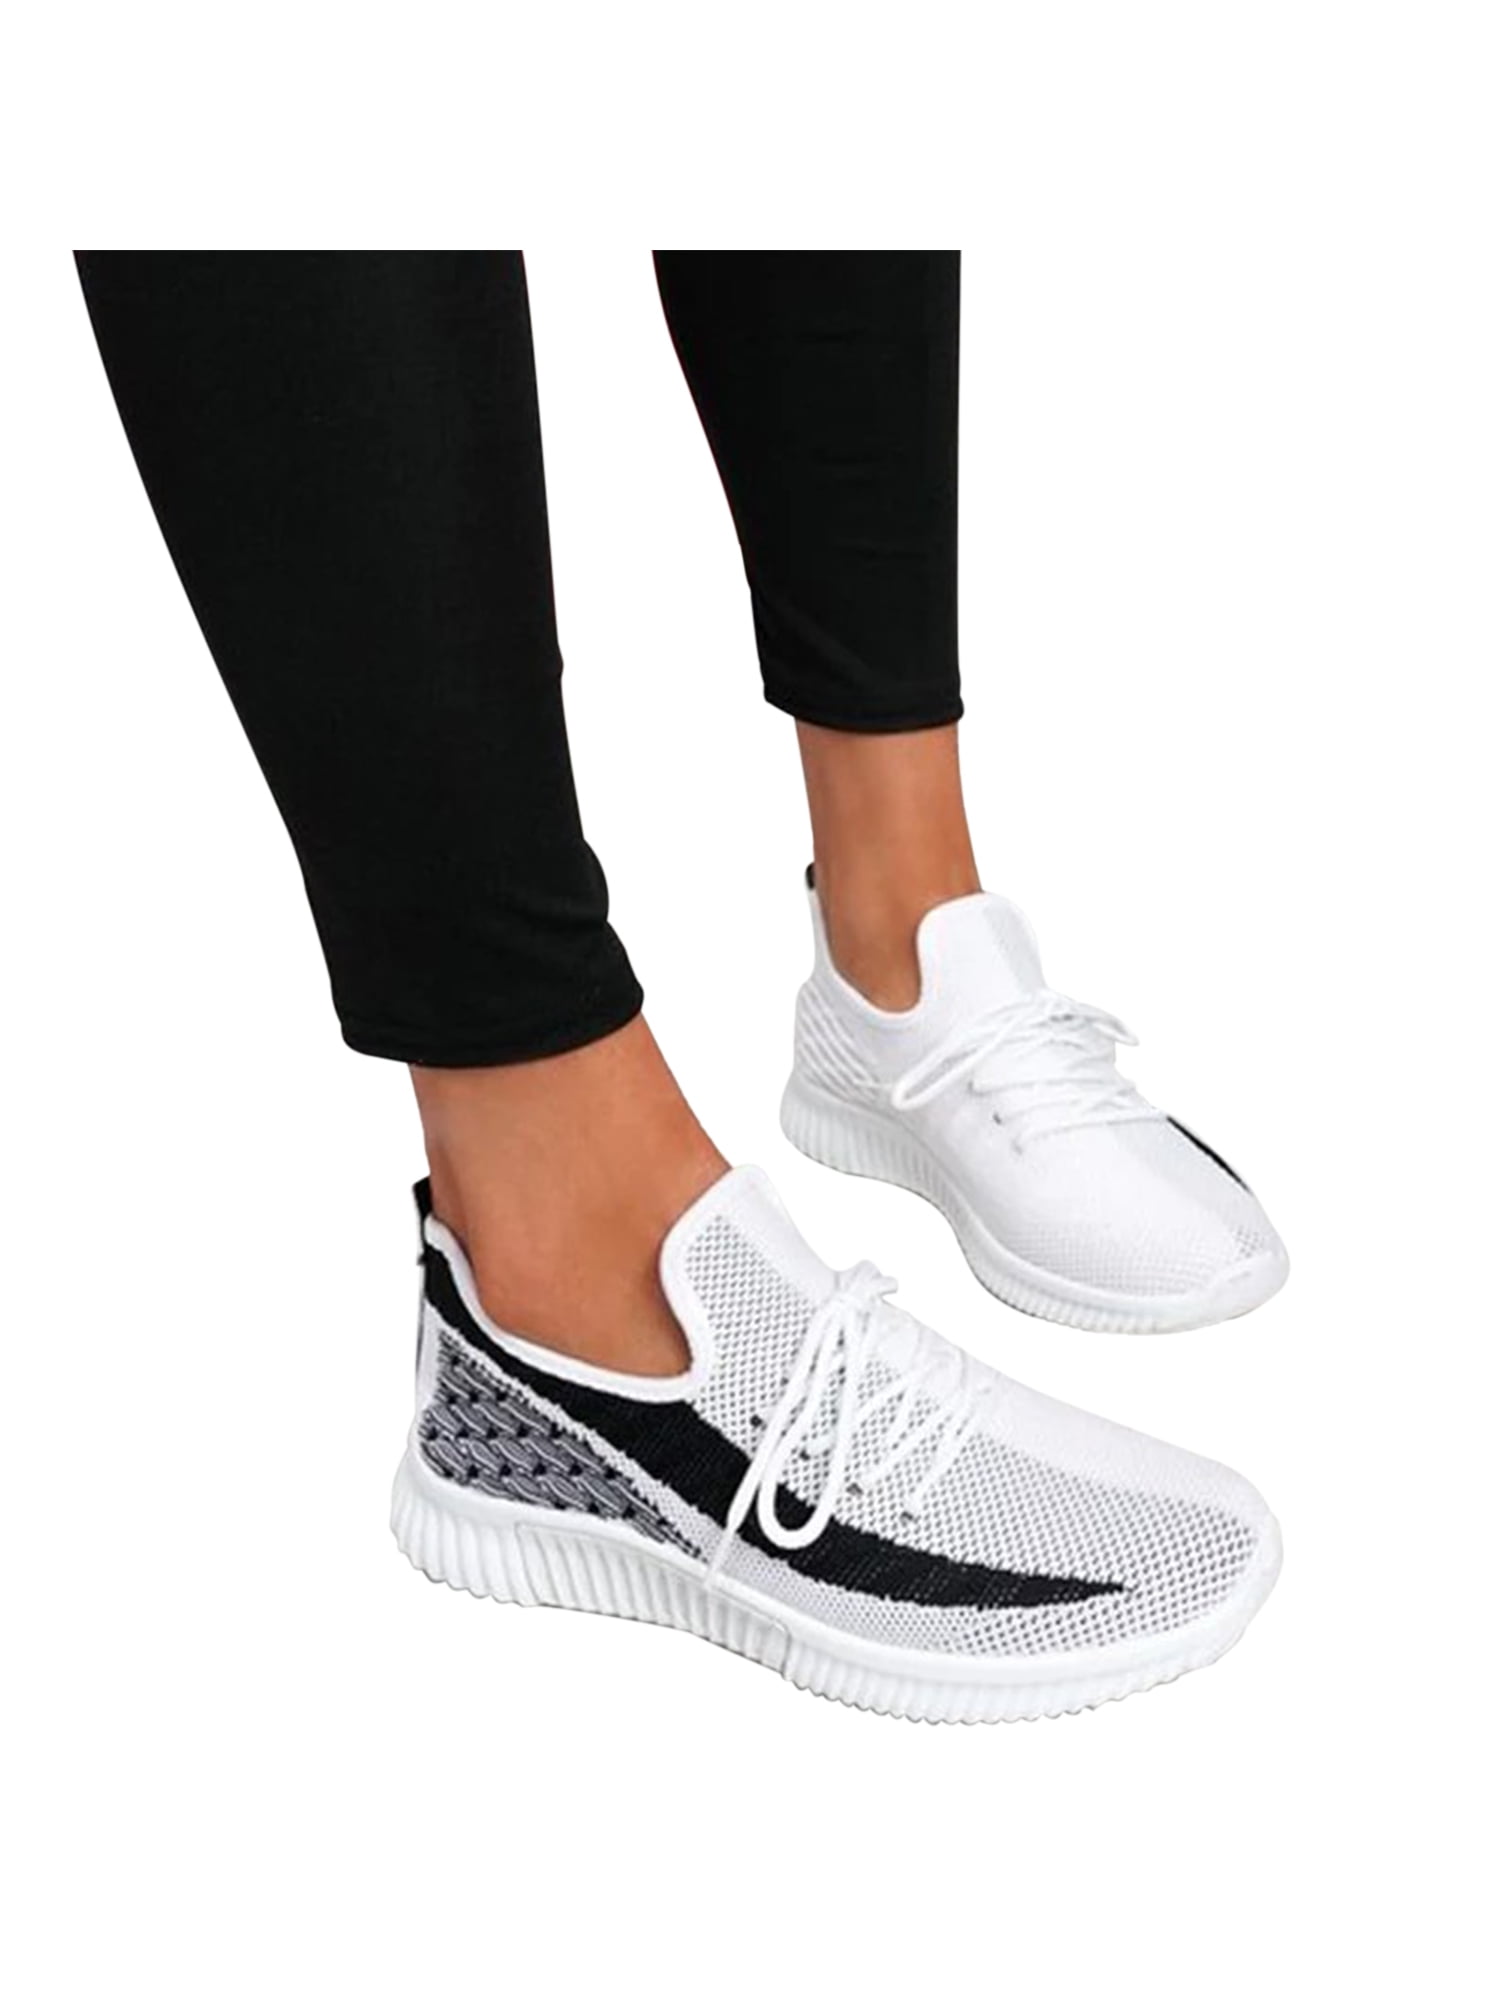 womens Trainers Sneakers Breathable Sport Running Shoes Lightweight Gym Shoes 